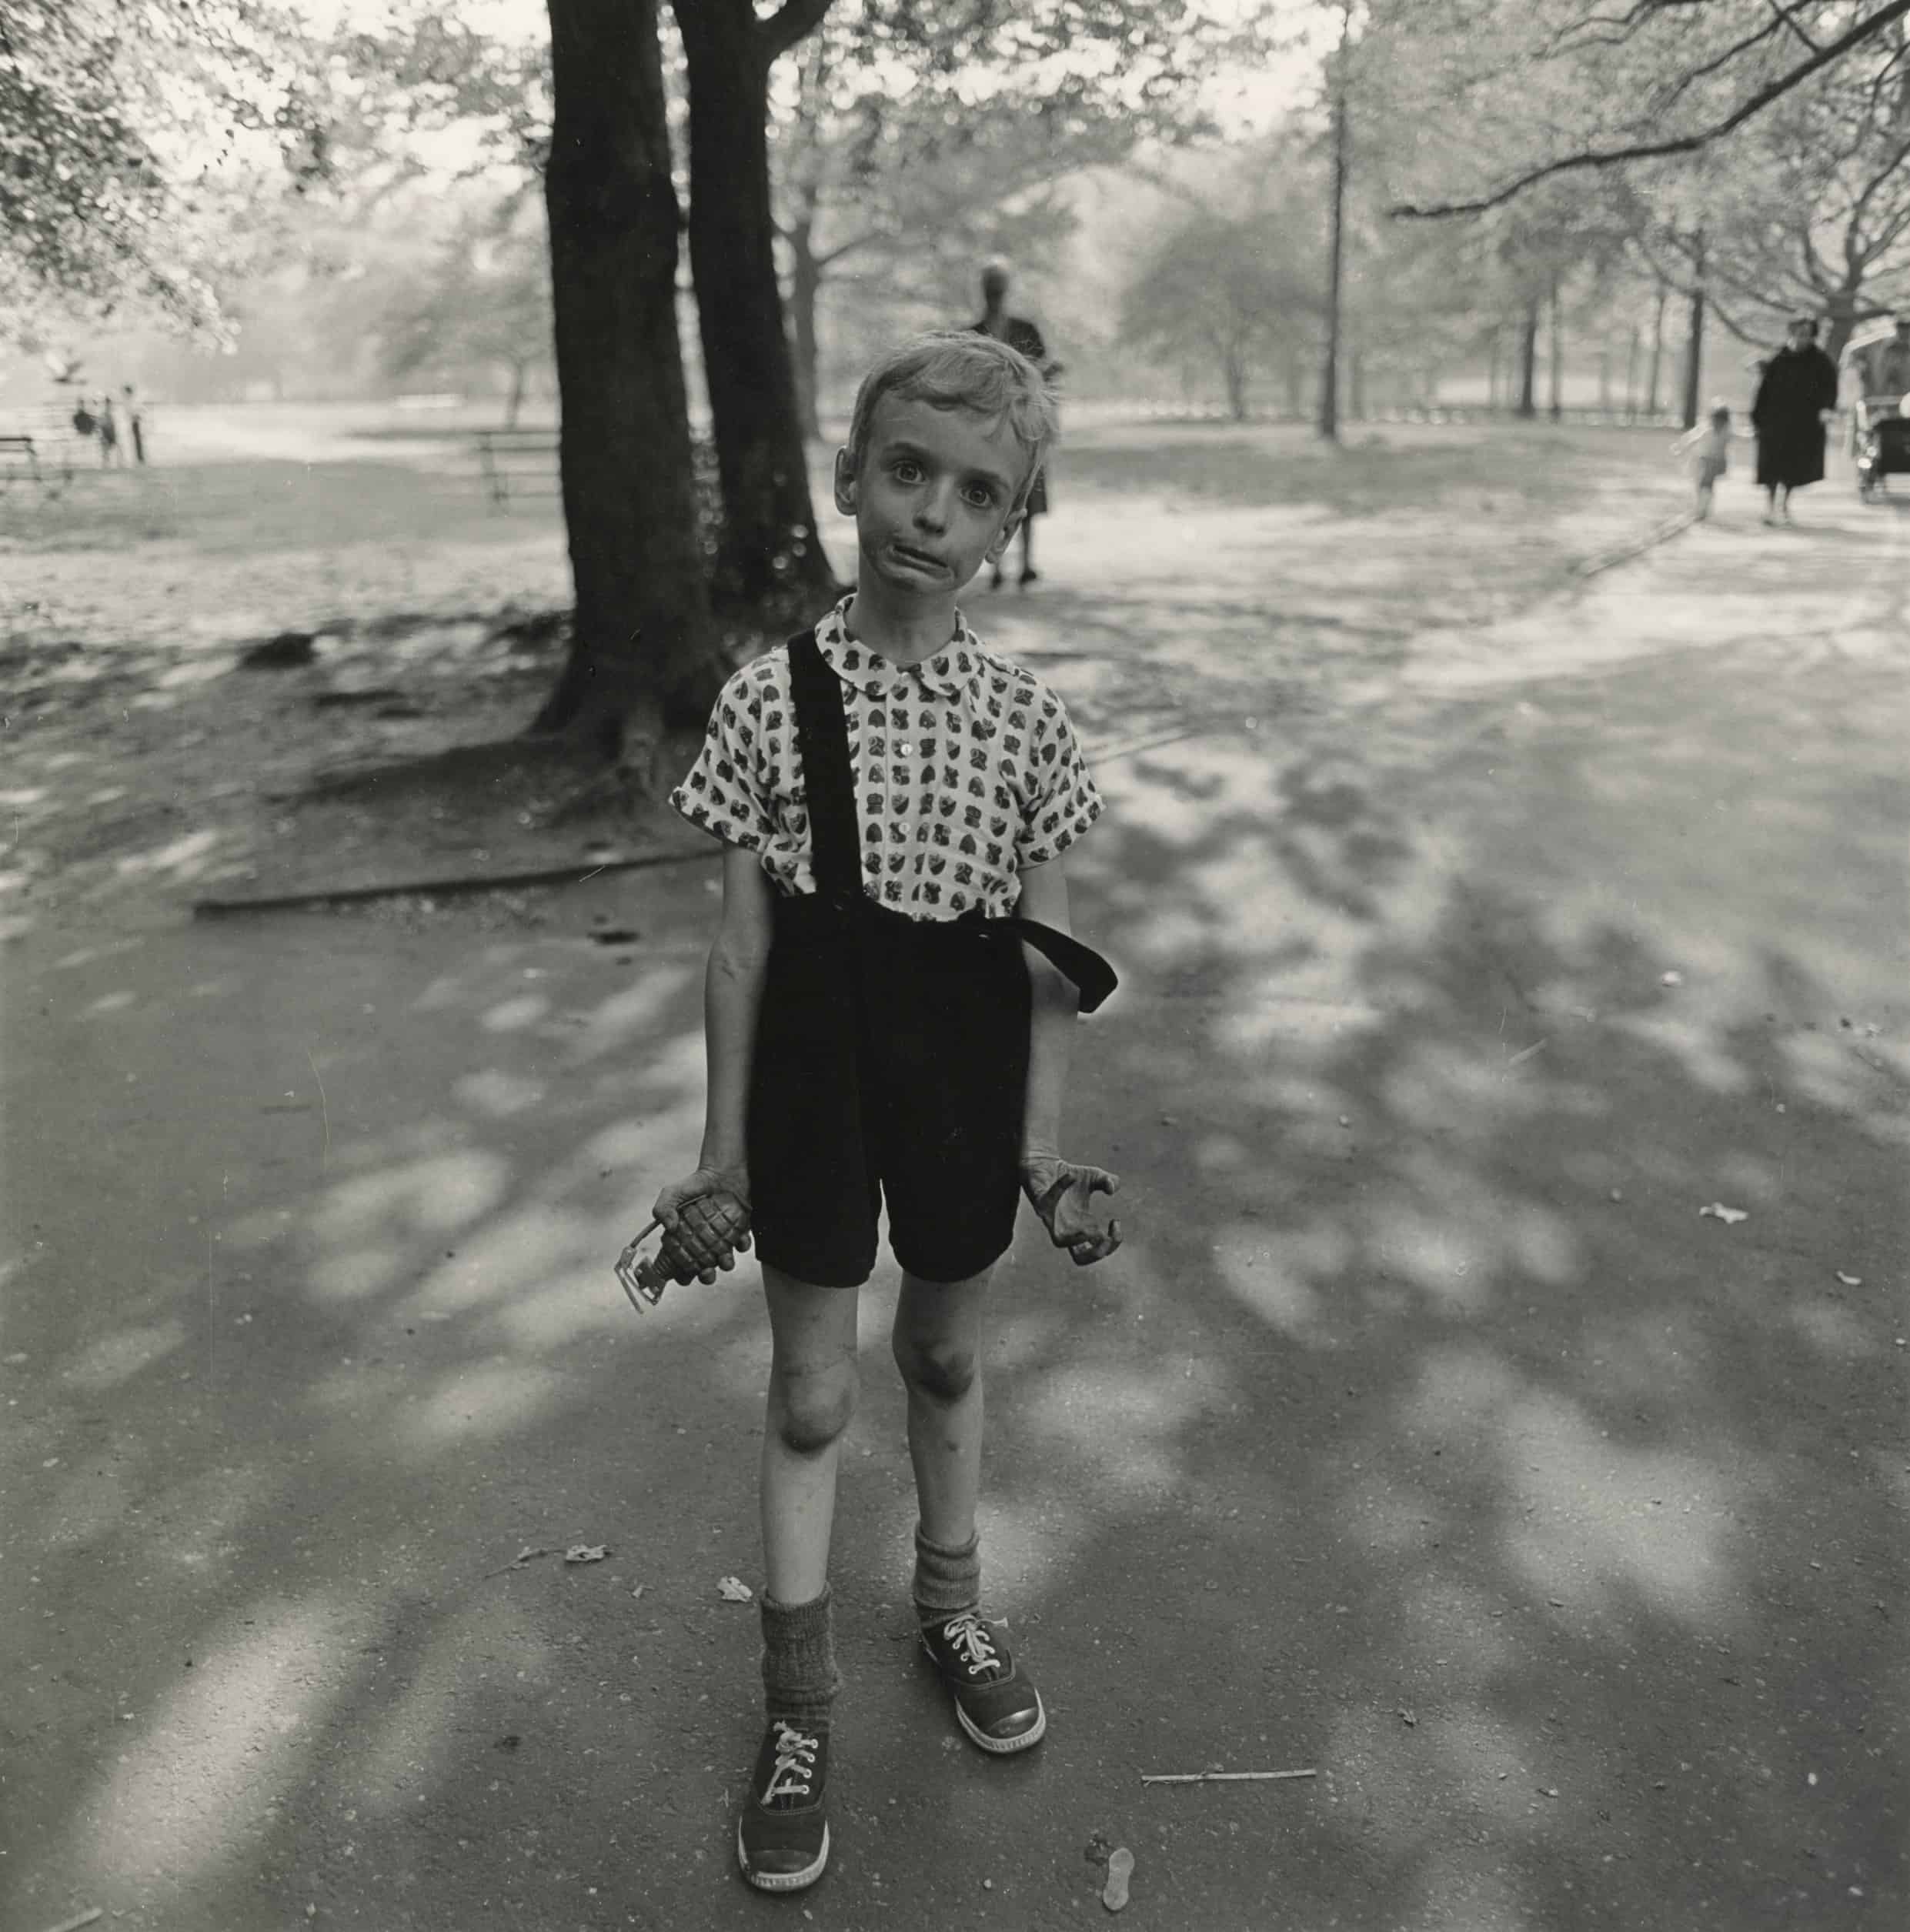 ©Diane Arbus. Child With a Toy Hand Grenade in Central Park.